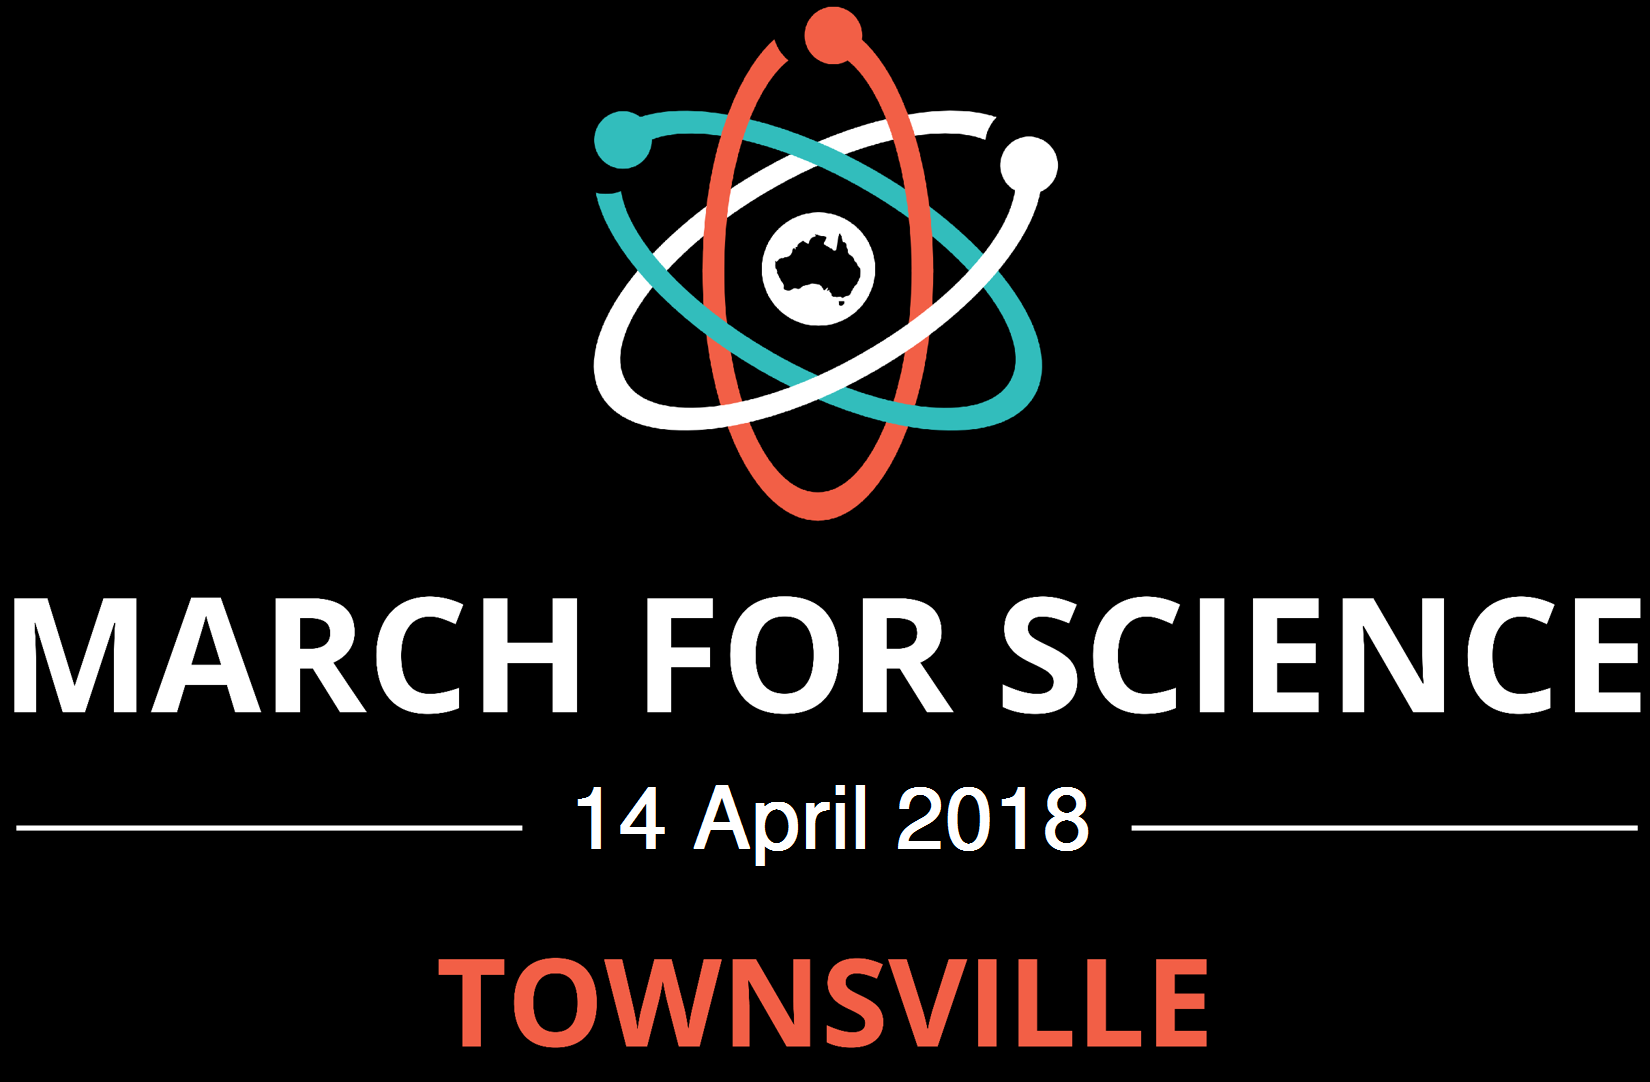 March for Science Townsville logo